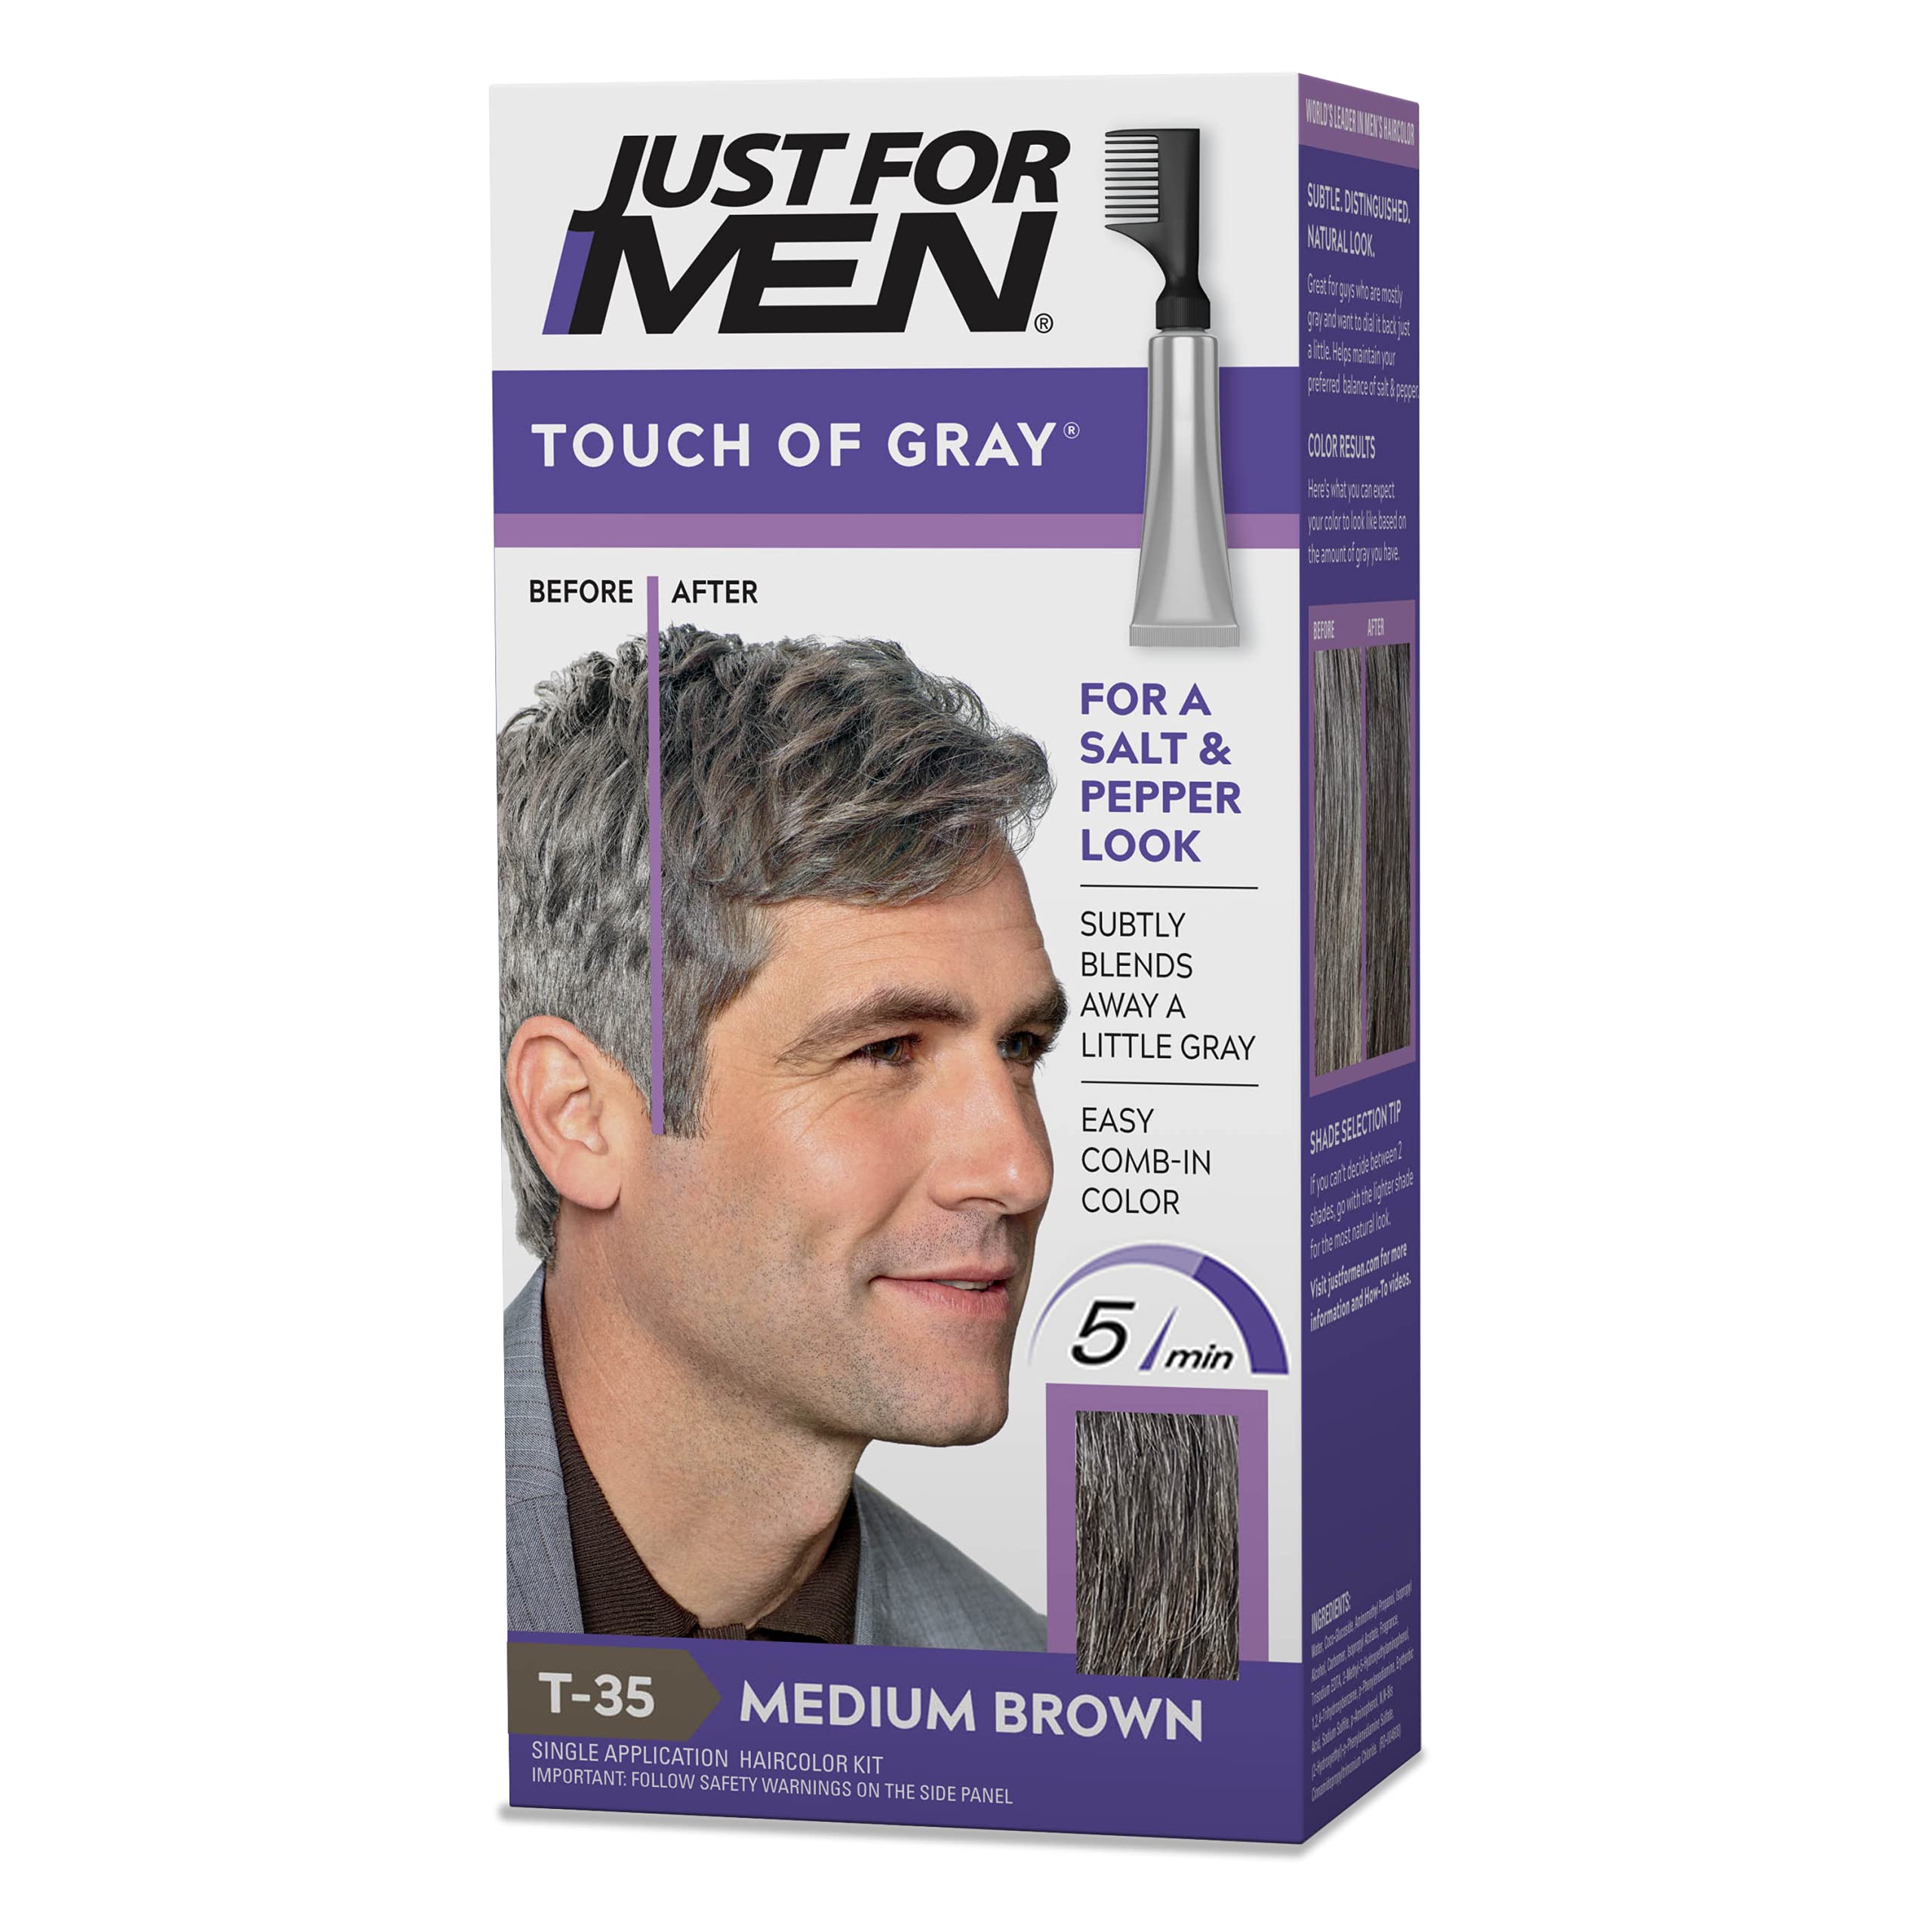 Just For Men Touch of Gray, Mens Hair Color Kit with Comb Applicator for Easy Application, Great for a Salt and Pepper Look - Medium Brown, T-35, Pack of 1